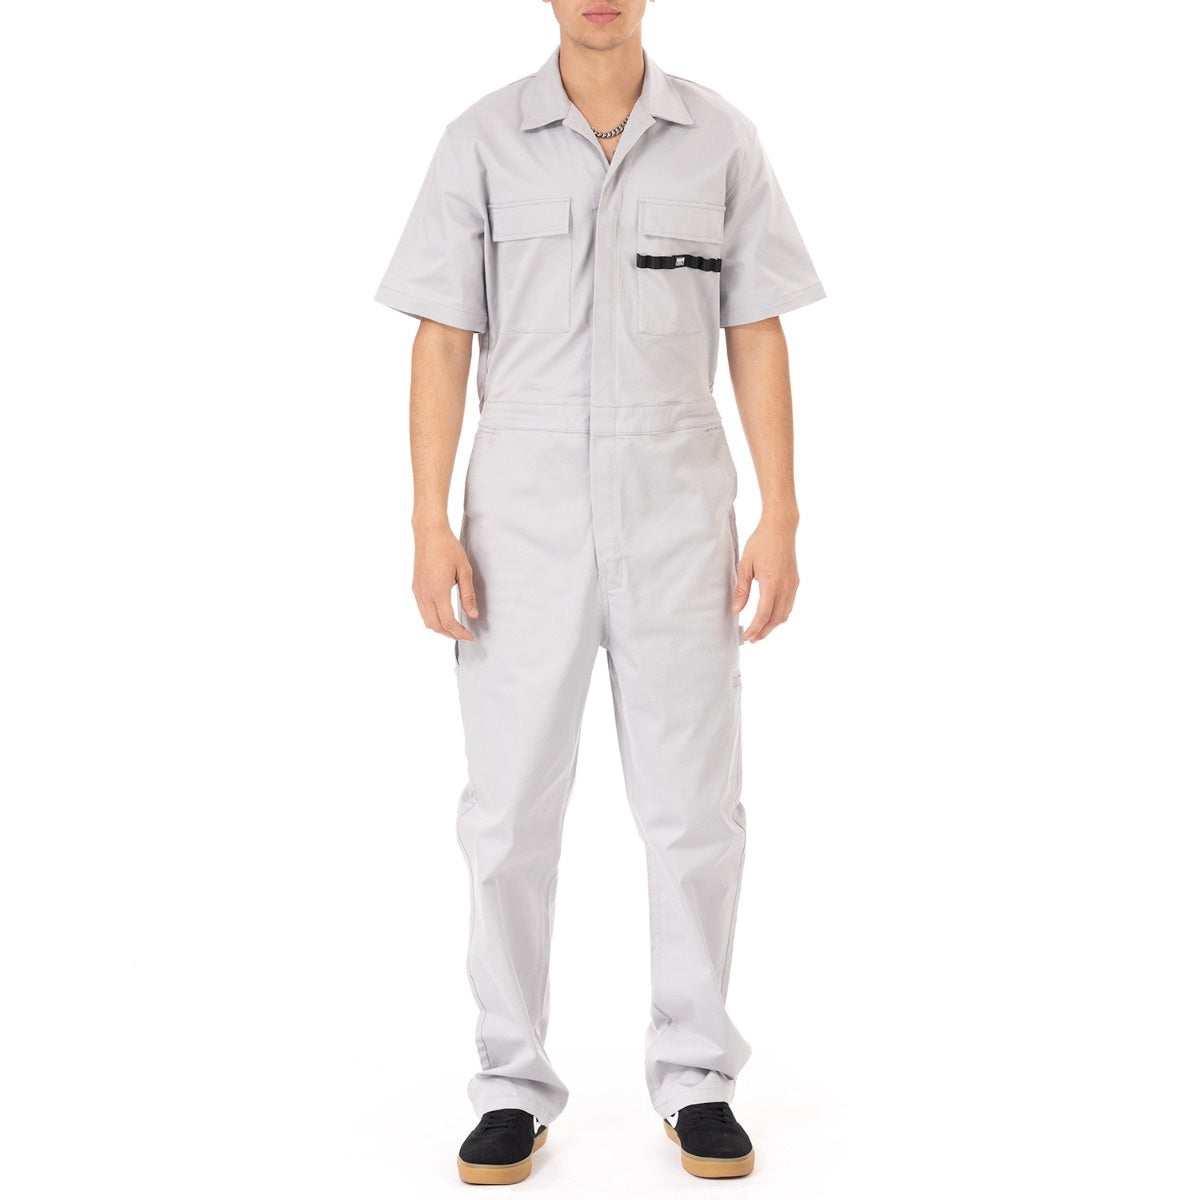 Pro Club Men's Workwear Mechanic's Short Sleeve Coverall - Silver